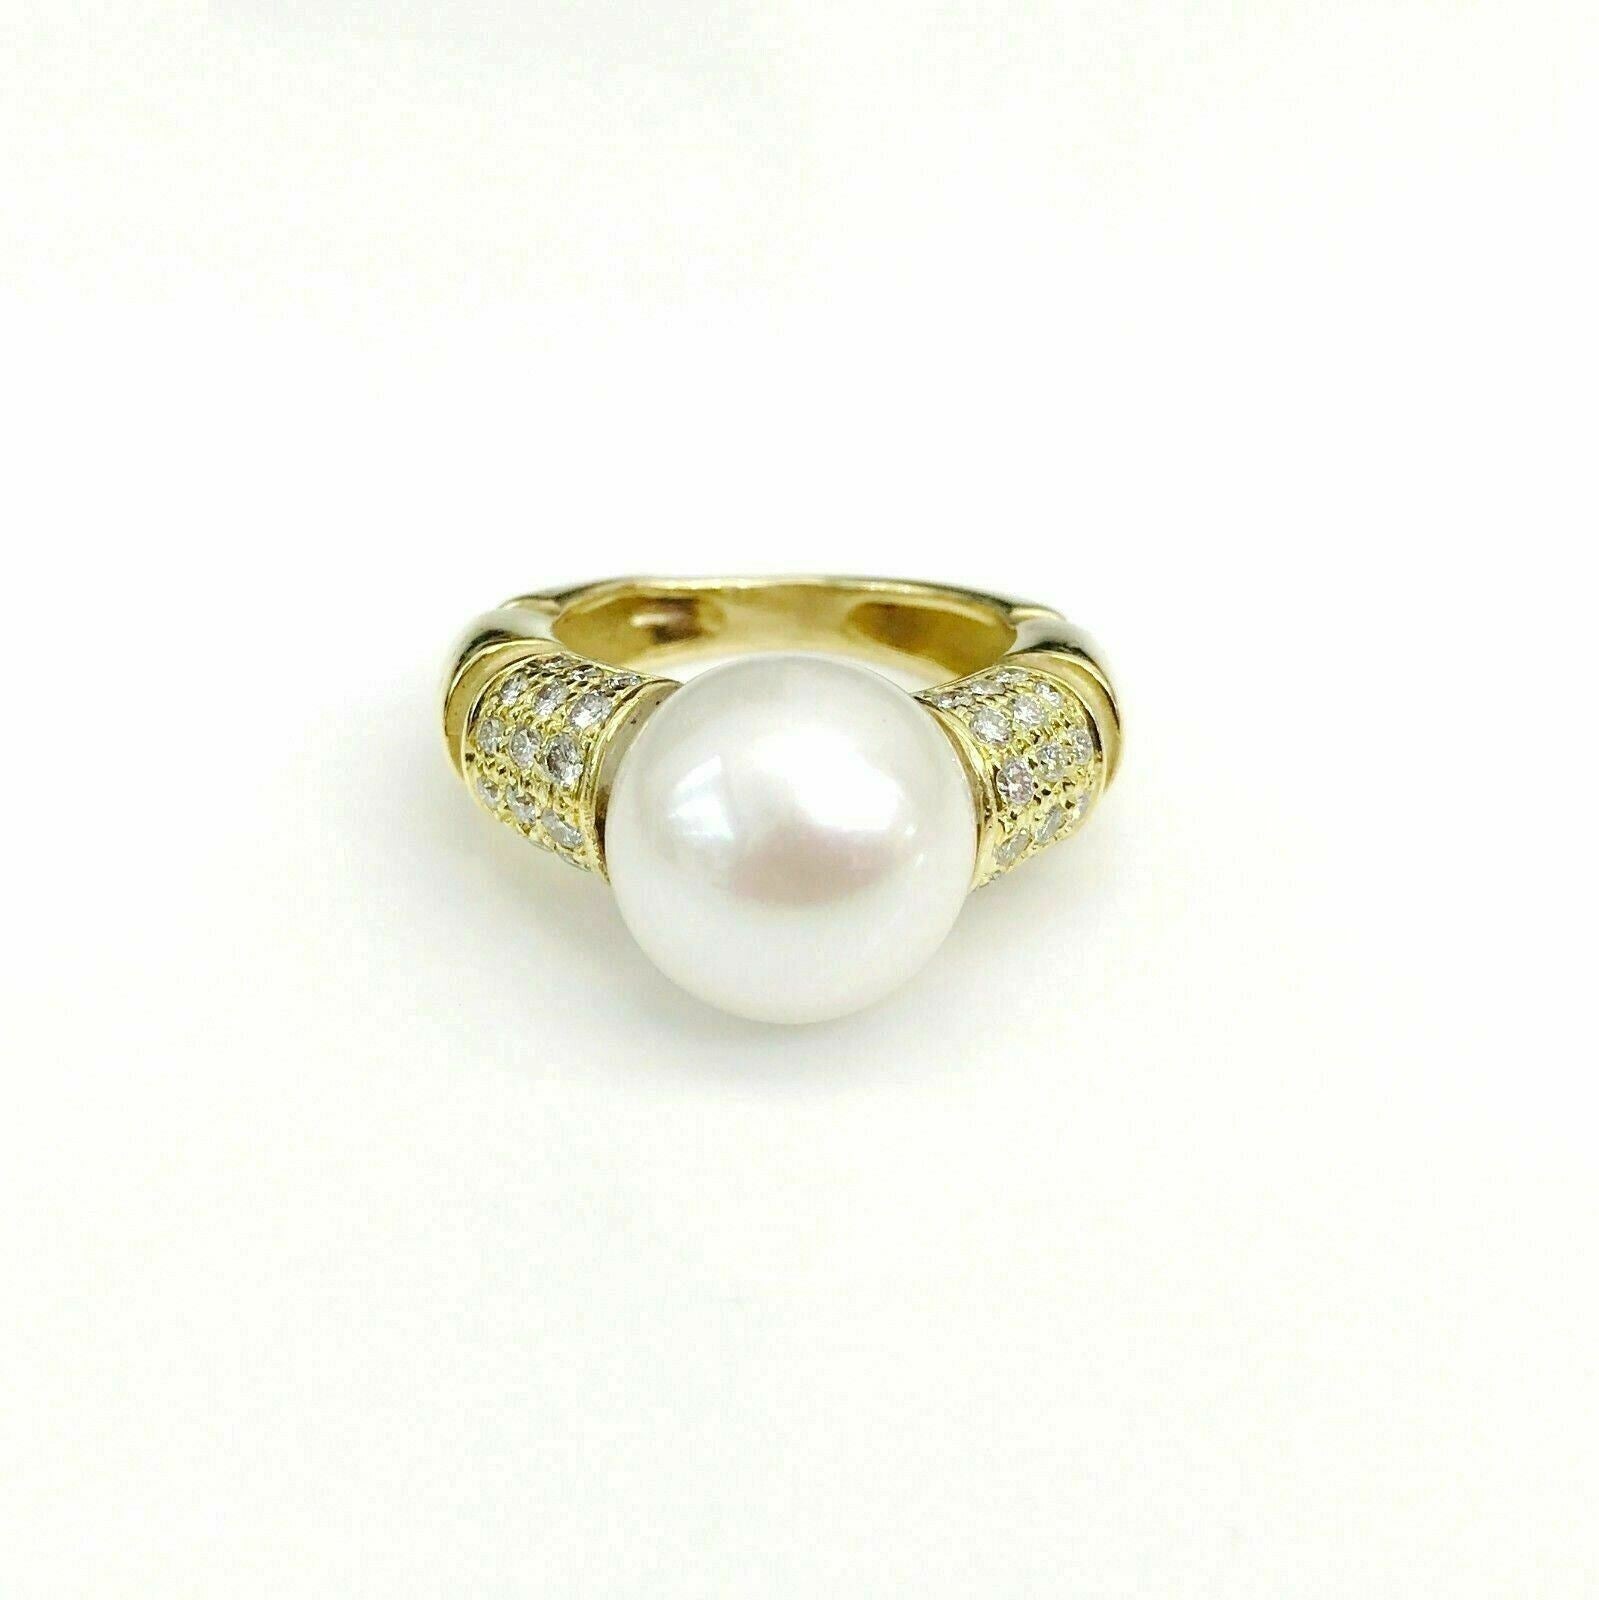 11 mm Round Pearl Ring with Diamond Accents in 18K Yellow Gold